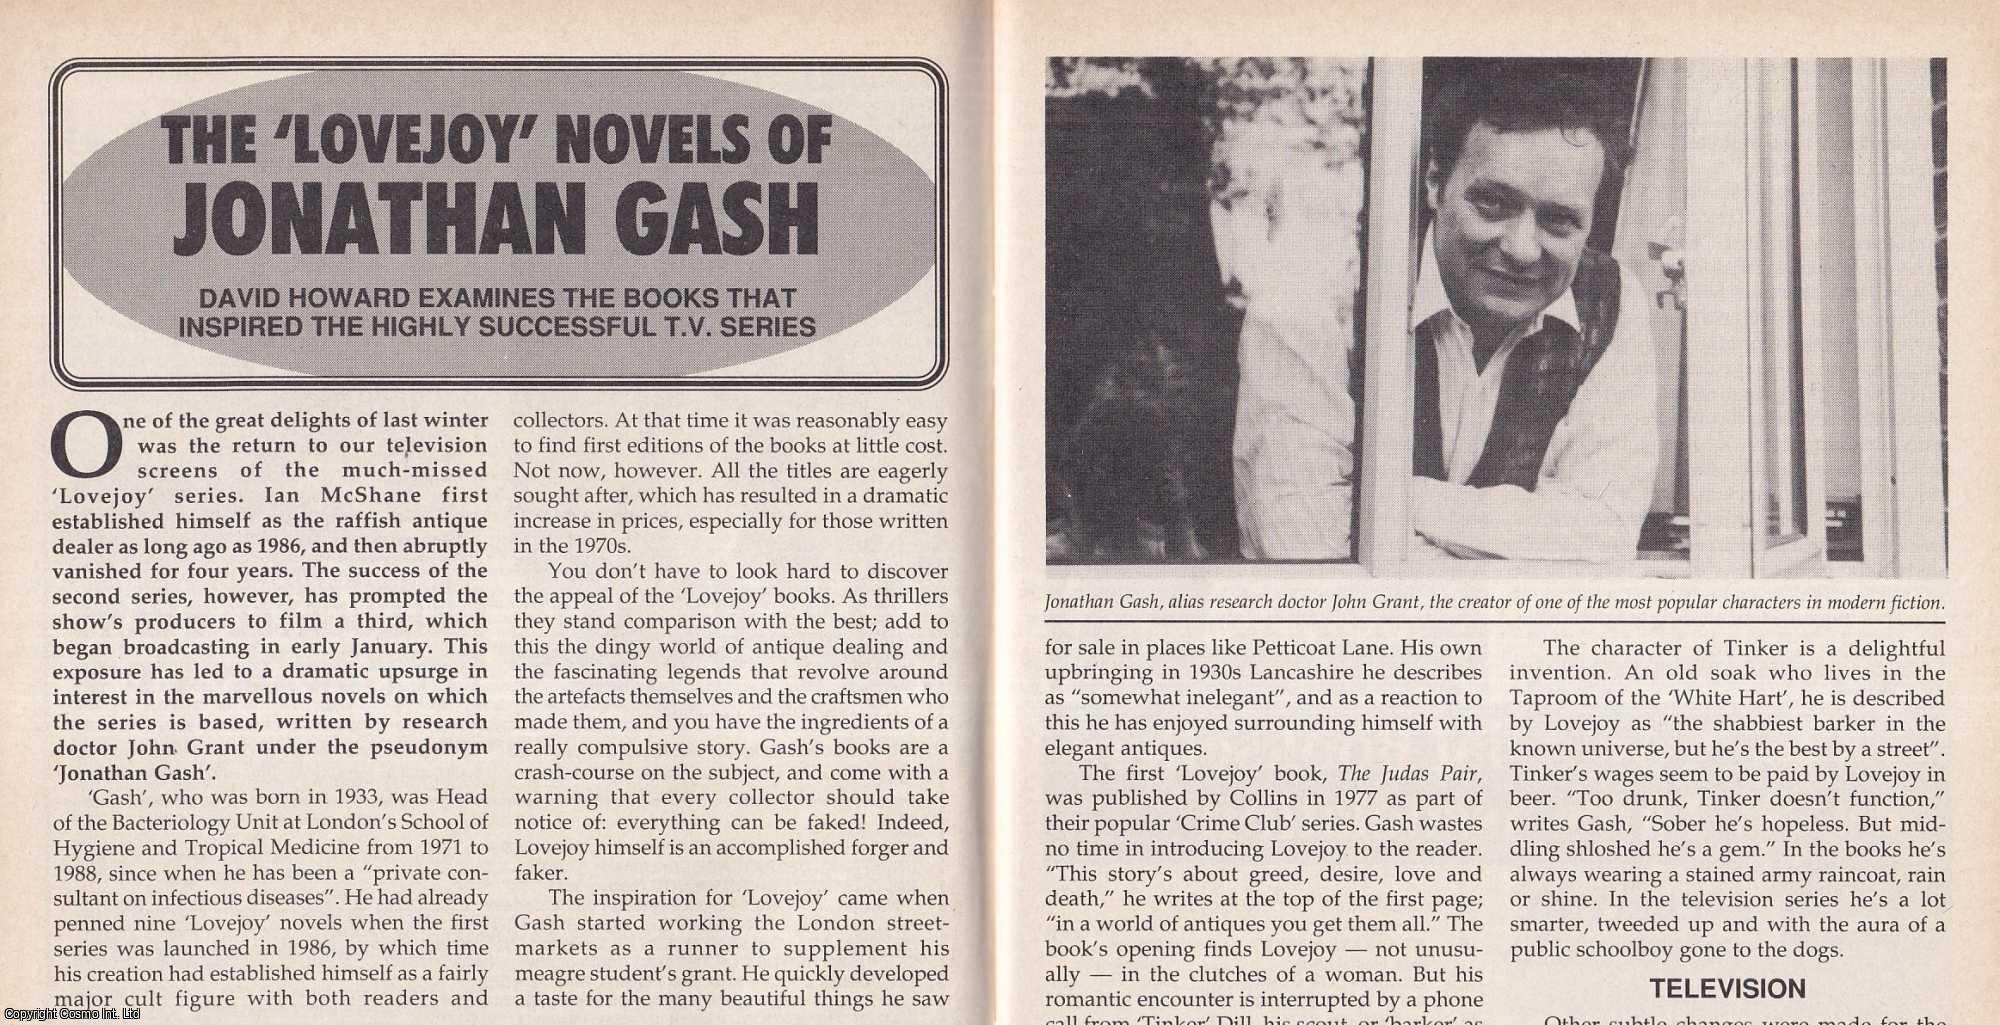 David Howard - The Lovejoy Novels of Jonathan Gash. This is an original article separated from an issue of The Book & Magazine Collector publication, 1992.